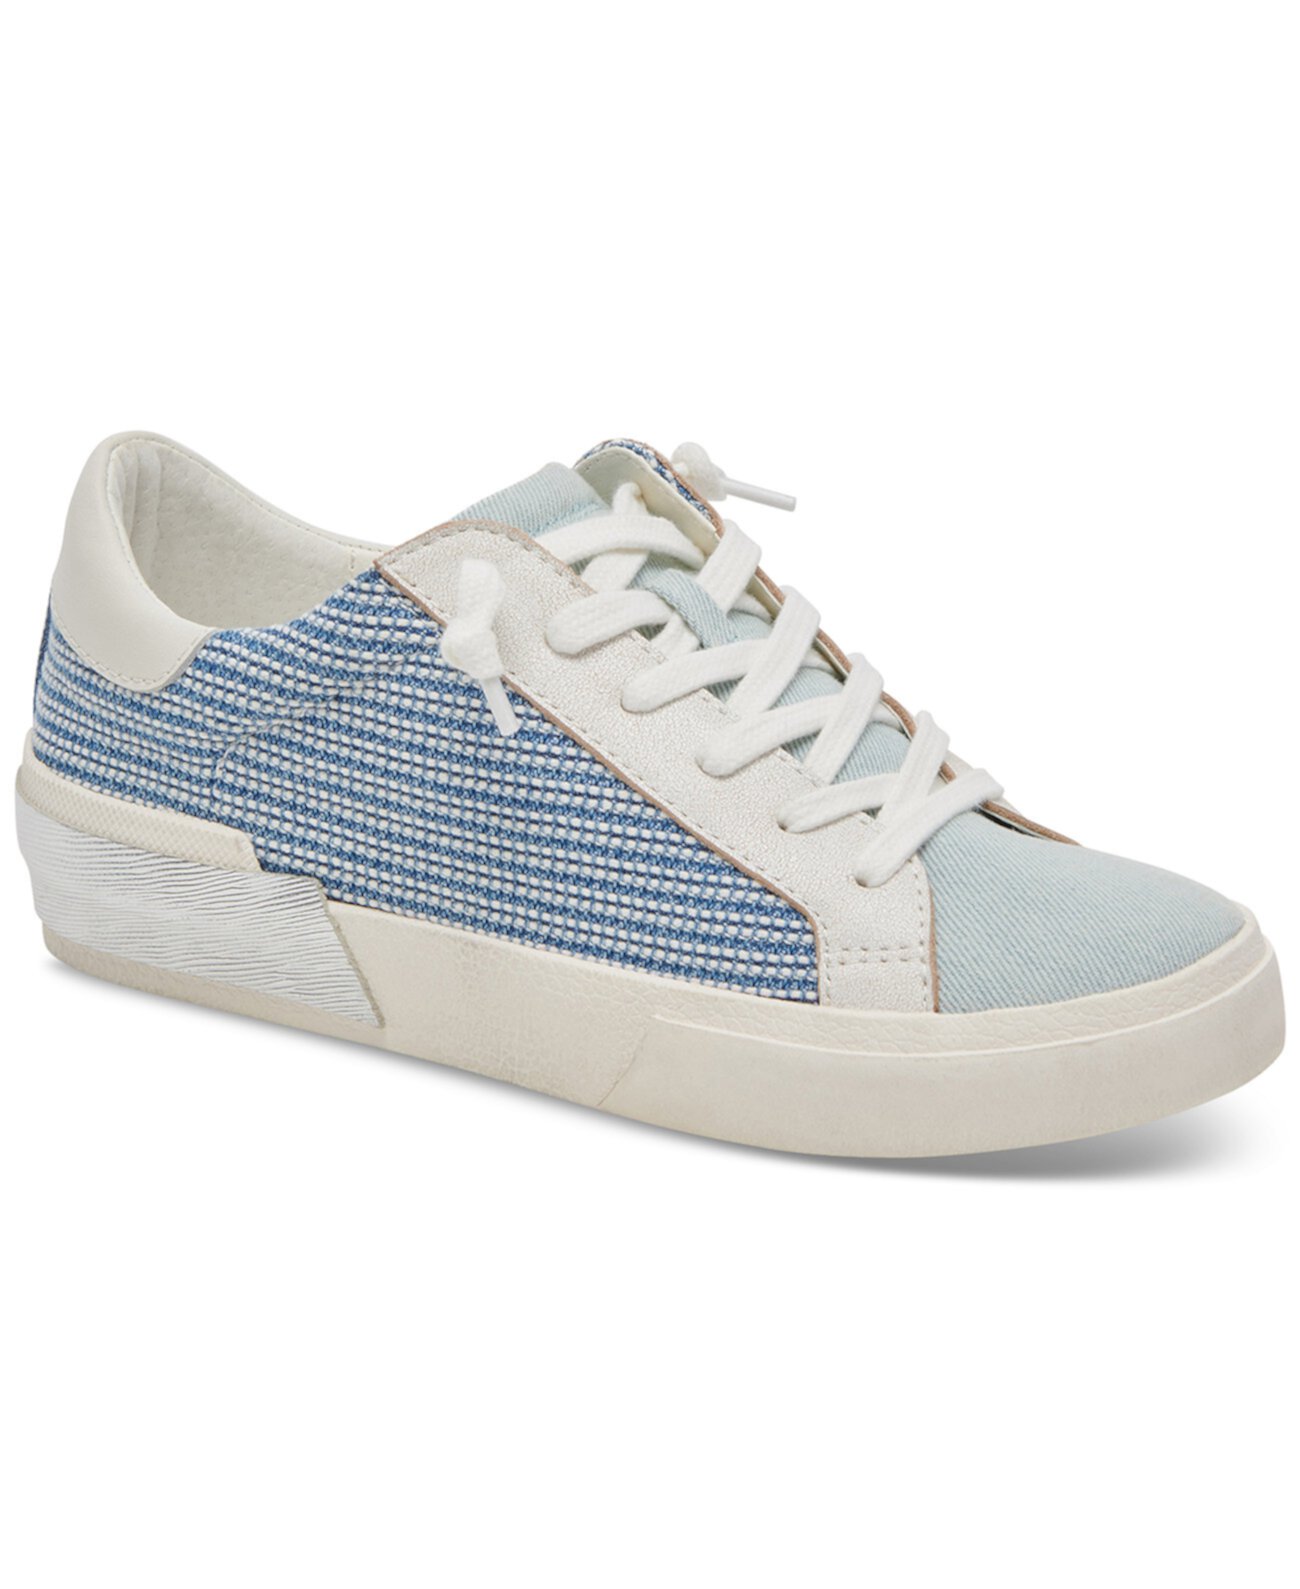 Women's Zina Lace Up Sneakers Dolce Vita